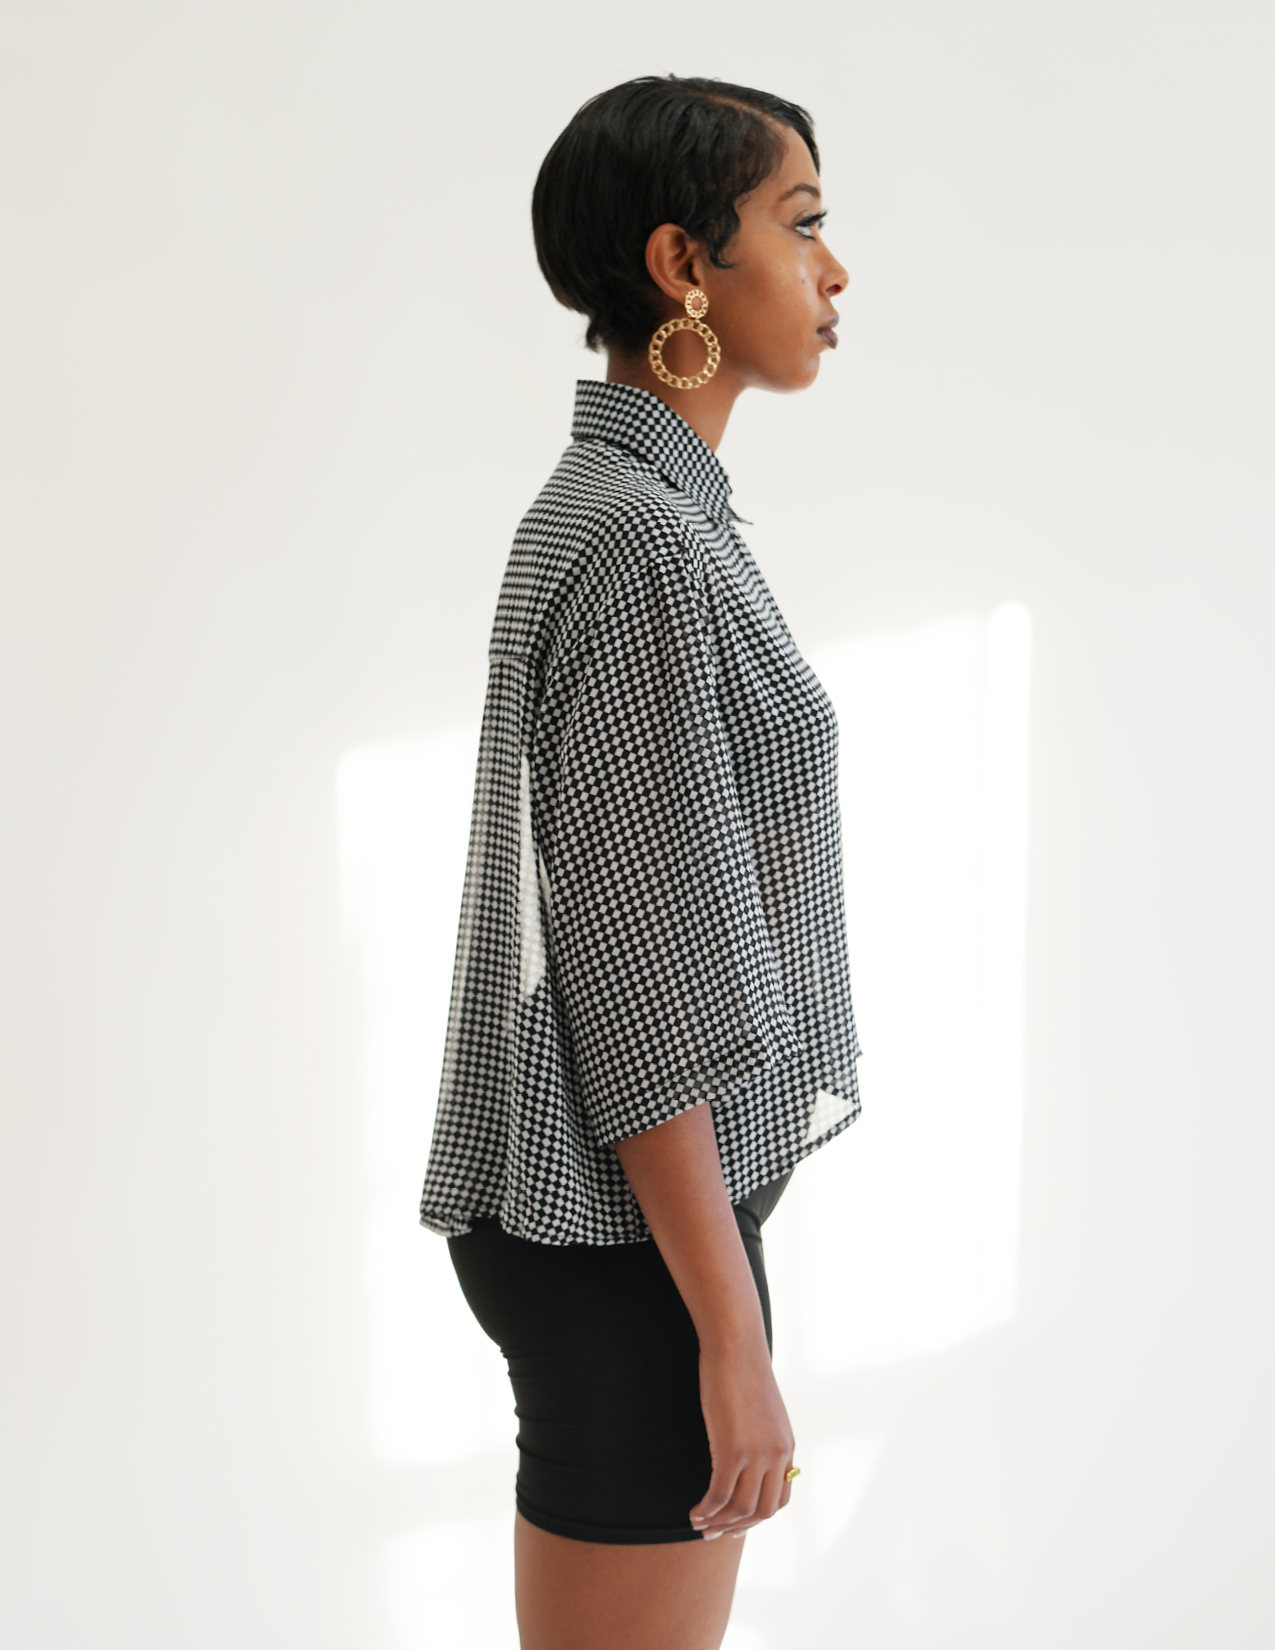 Issa Hi-Low Checkered Swing Cropped Shirt